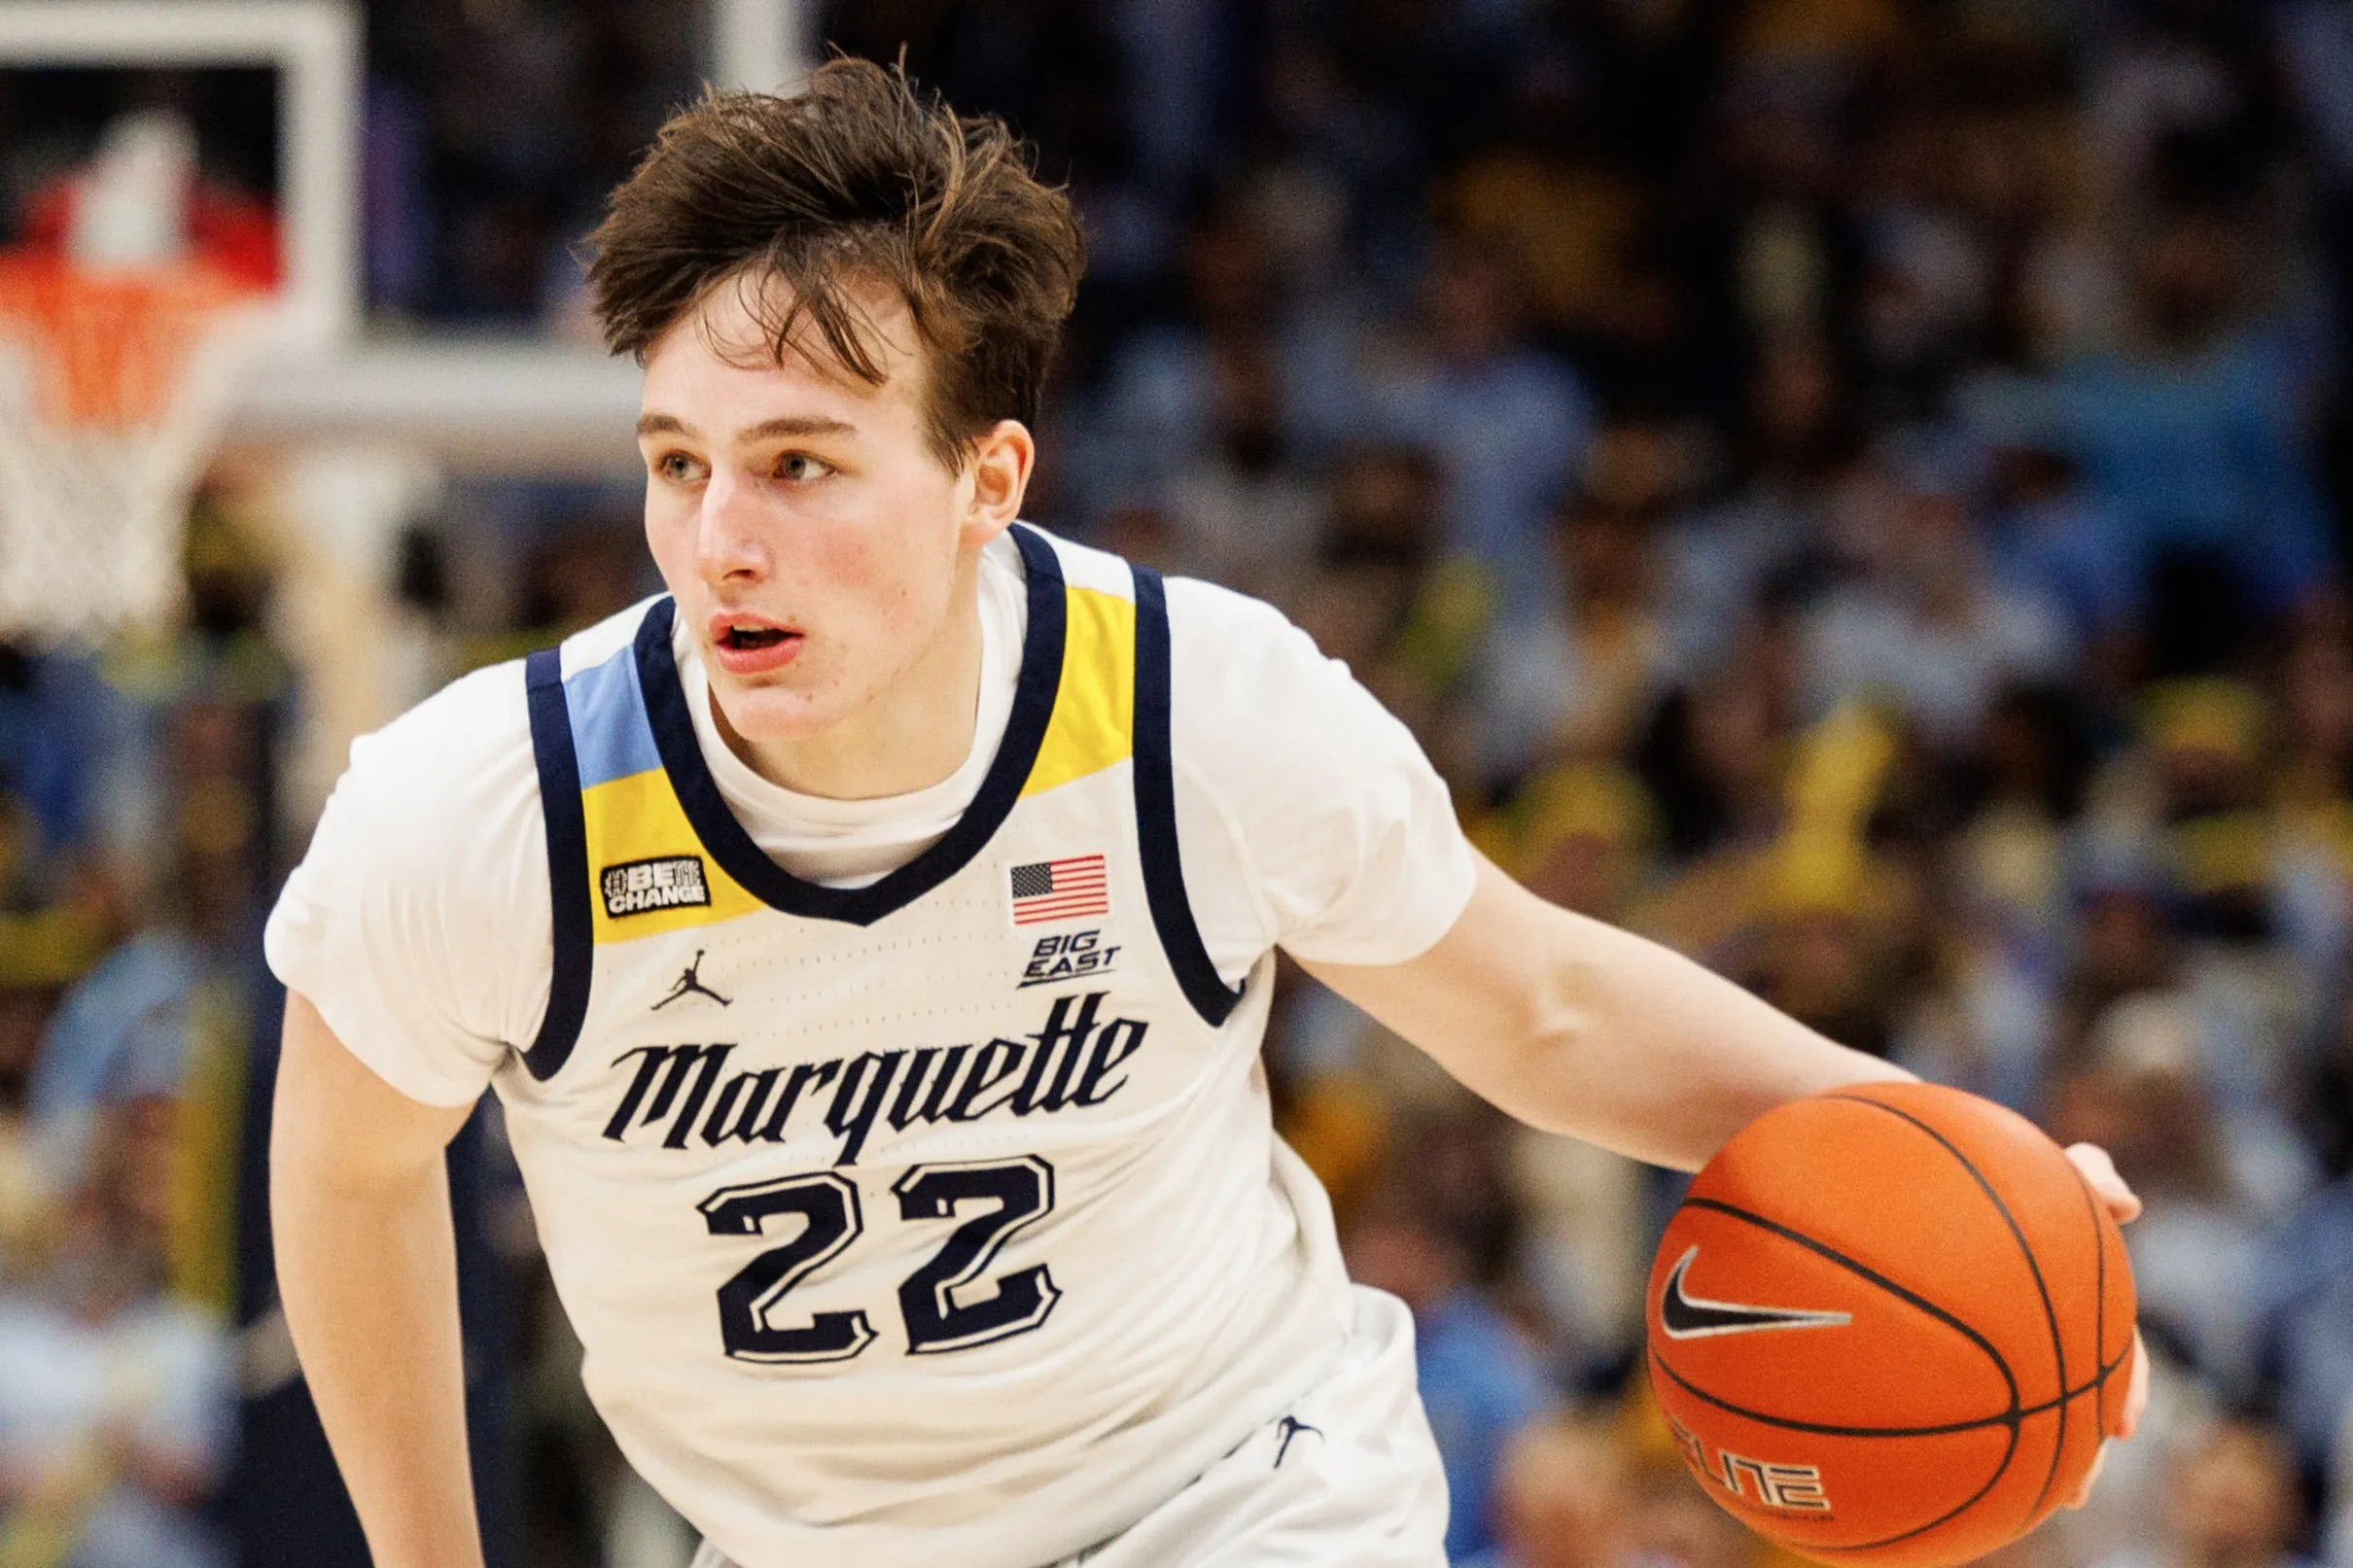 Printable Marquette Basketball Schedule